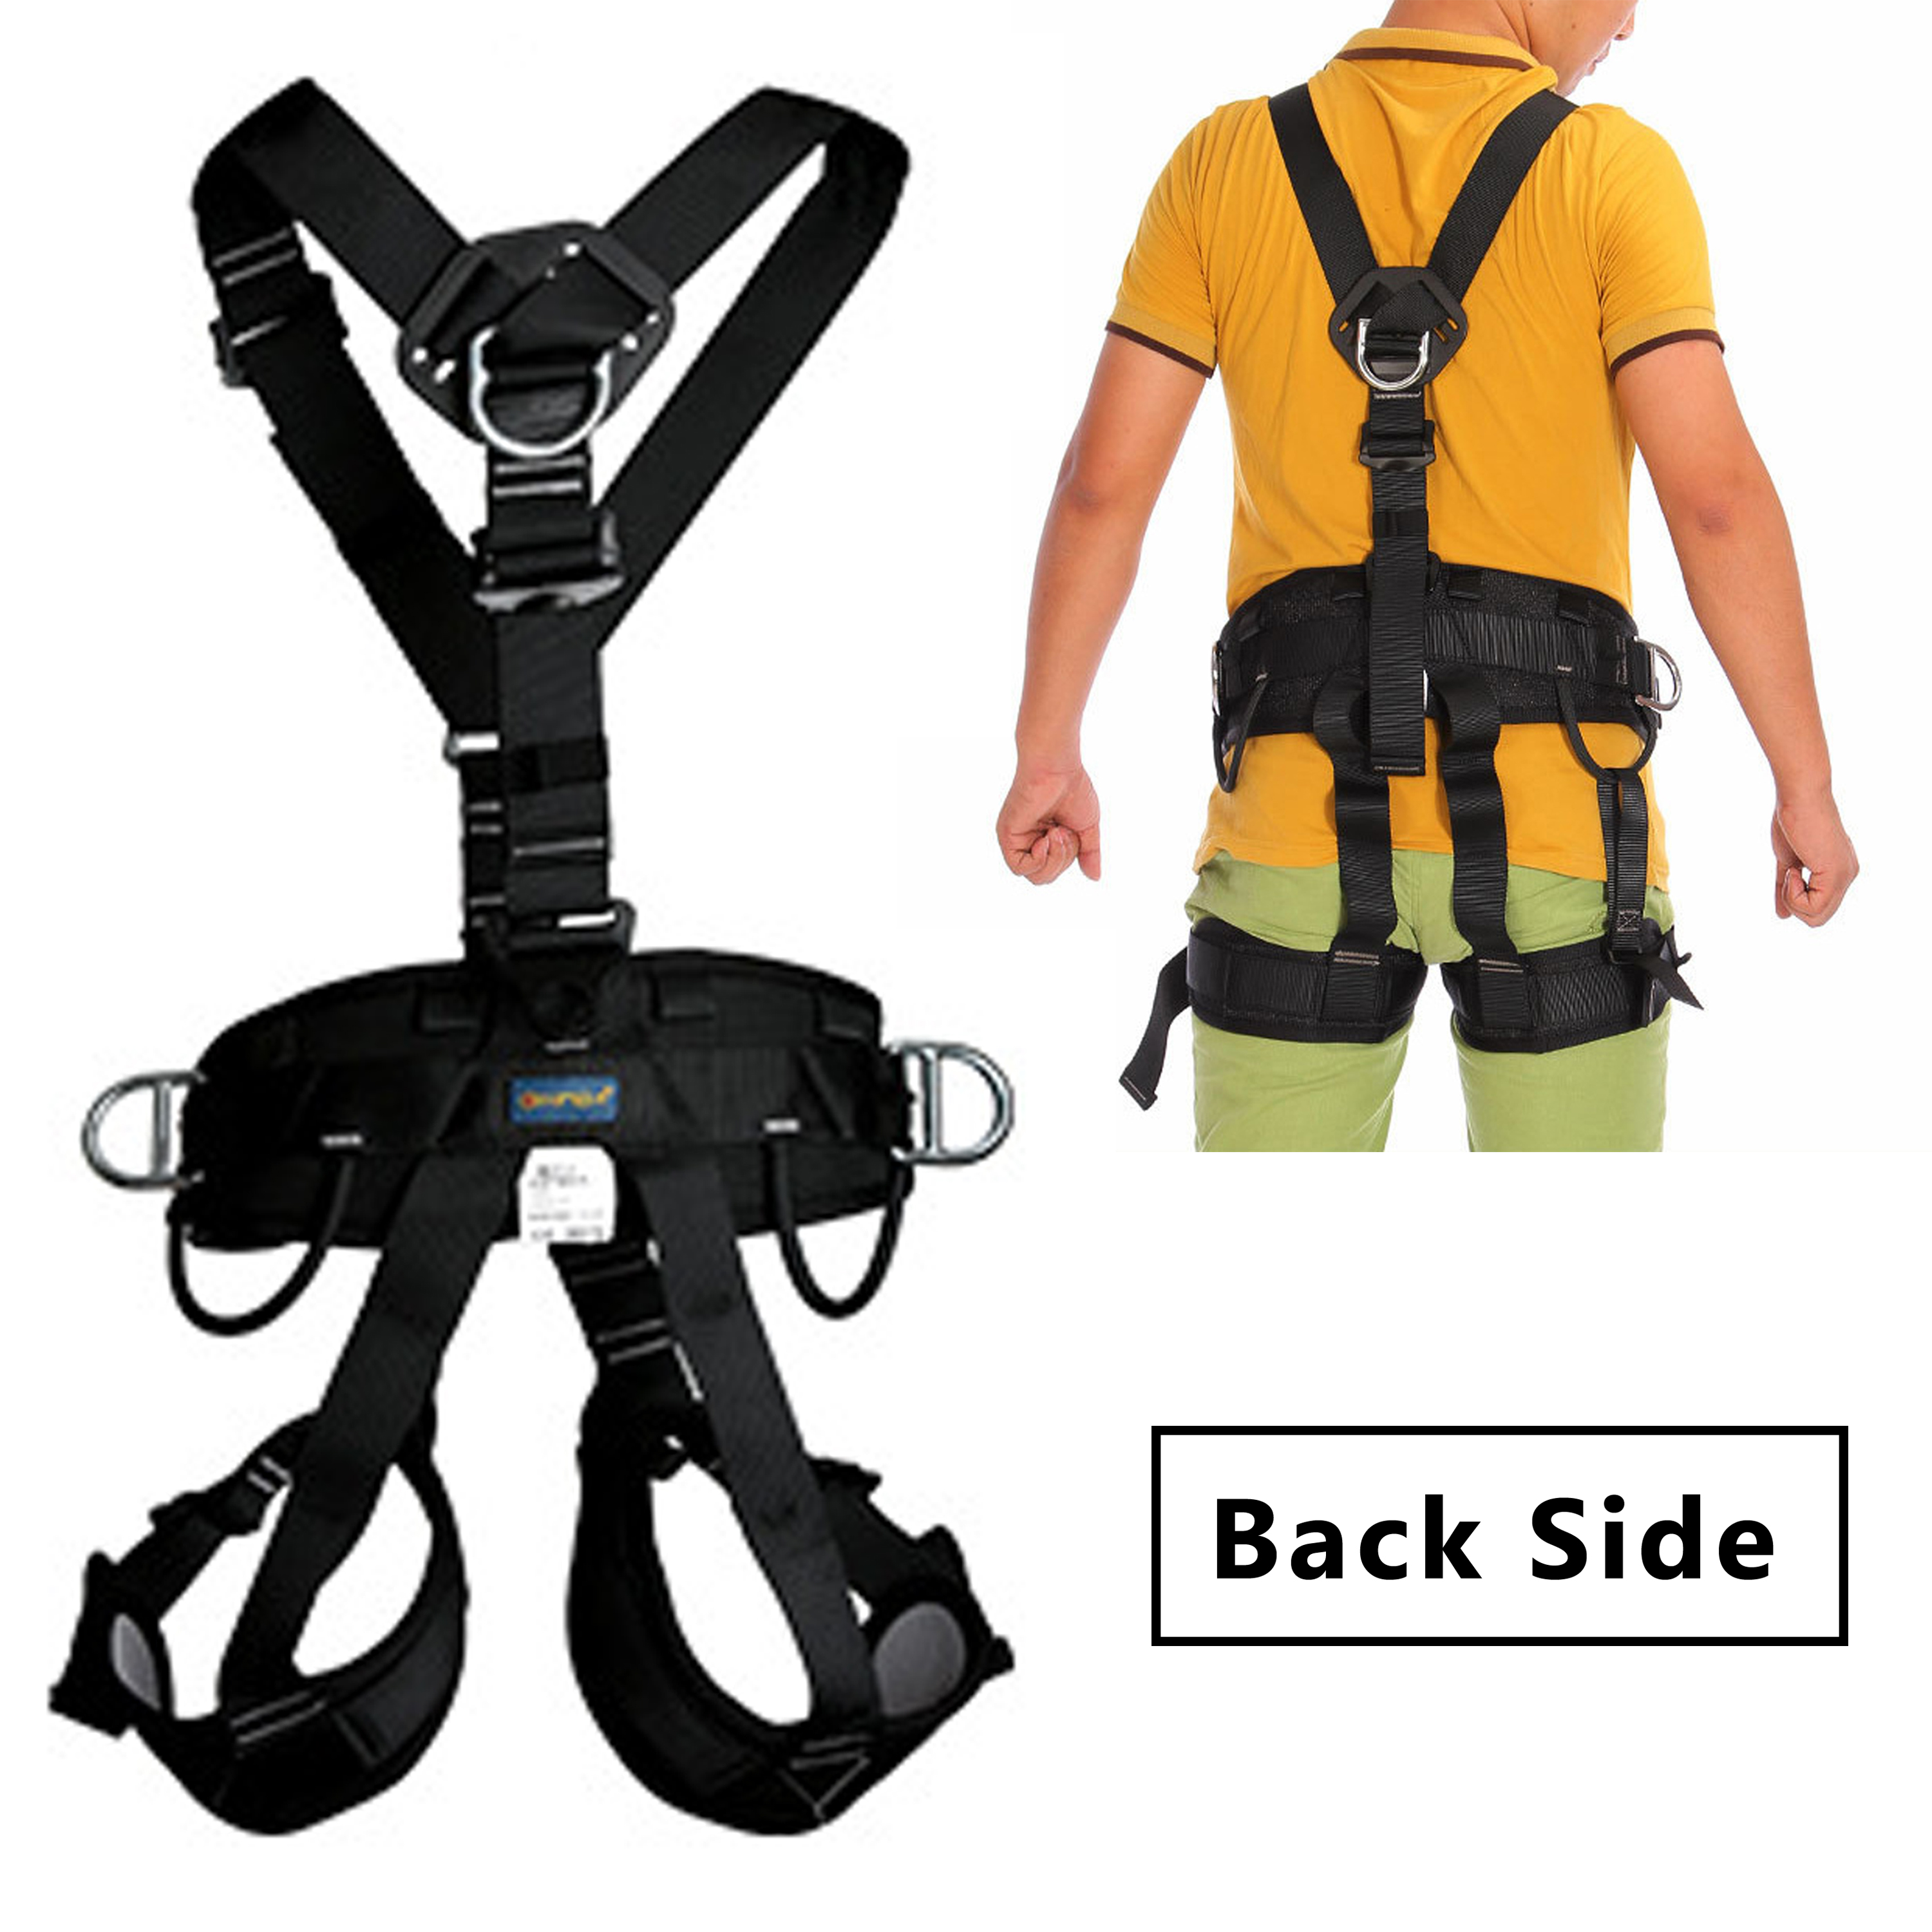 Outdoor Full/half Body Safety Rock Climbing Tree Rappelling Harness Seat Belt 